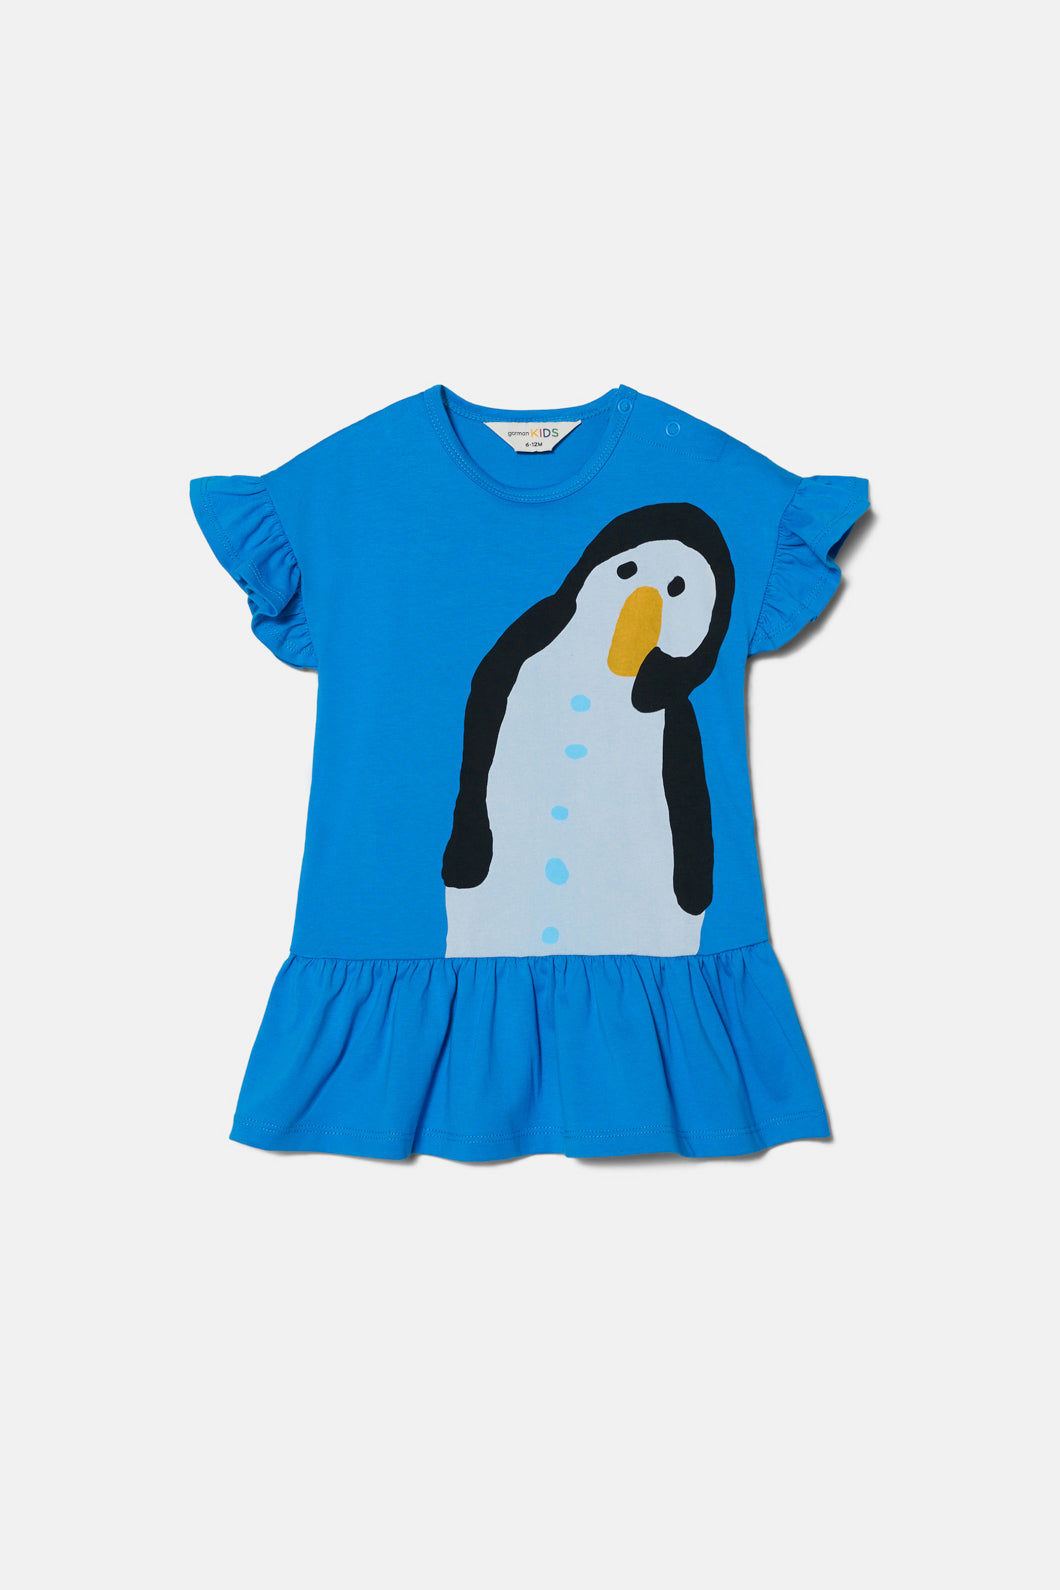 Size 6/6X: Penguin and Friends Girls Tunic and Legging Set